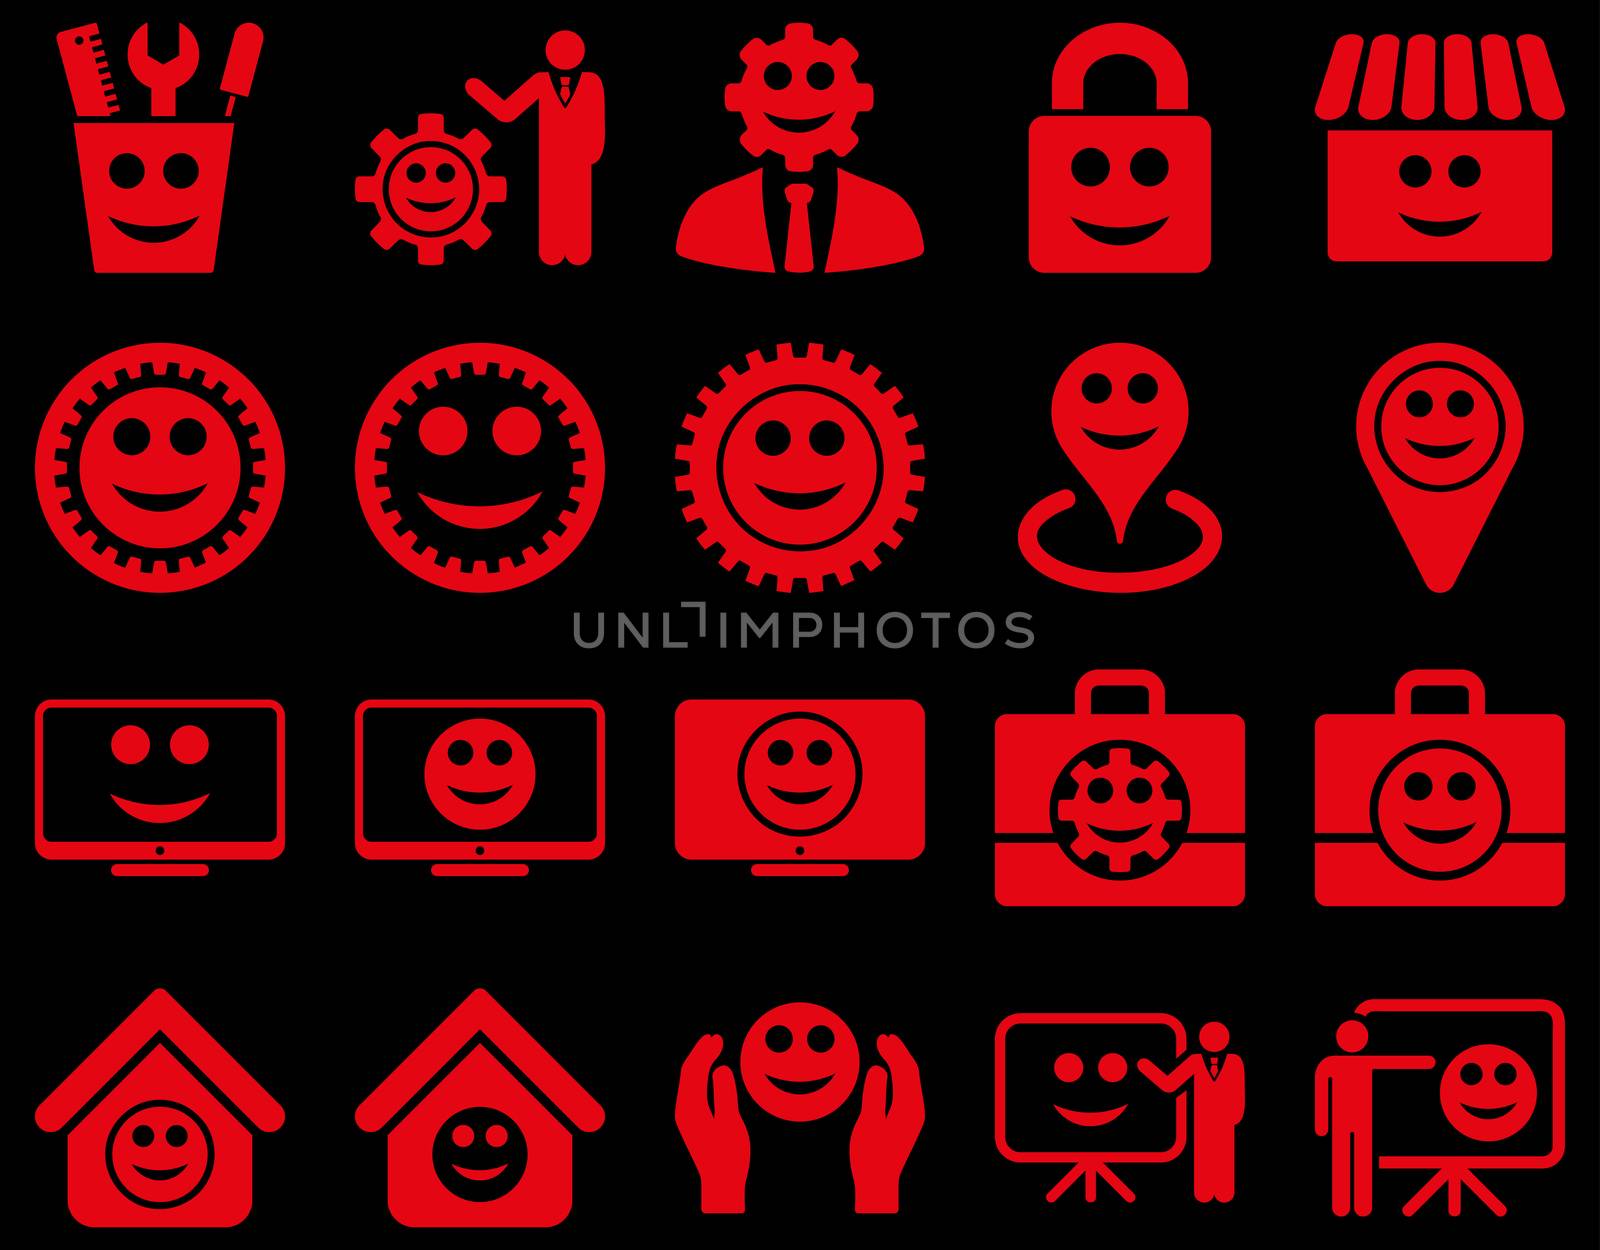 Tools, gears, smiles, management icons. Glyph set style is flat images, red symbols, isolated on a black background.